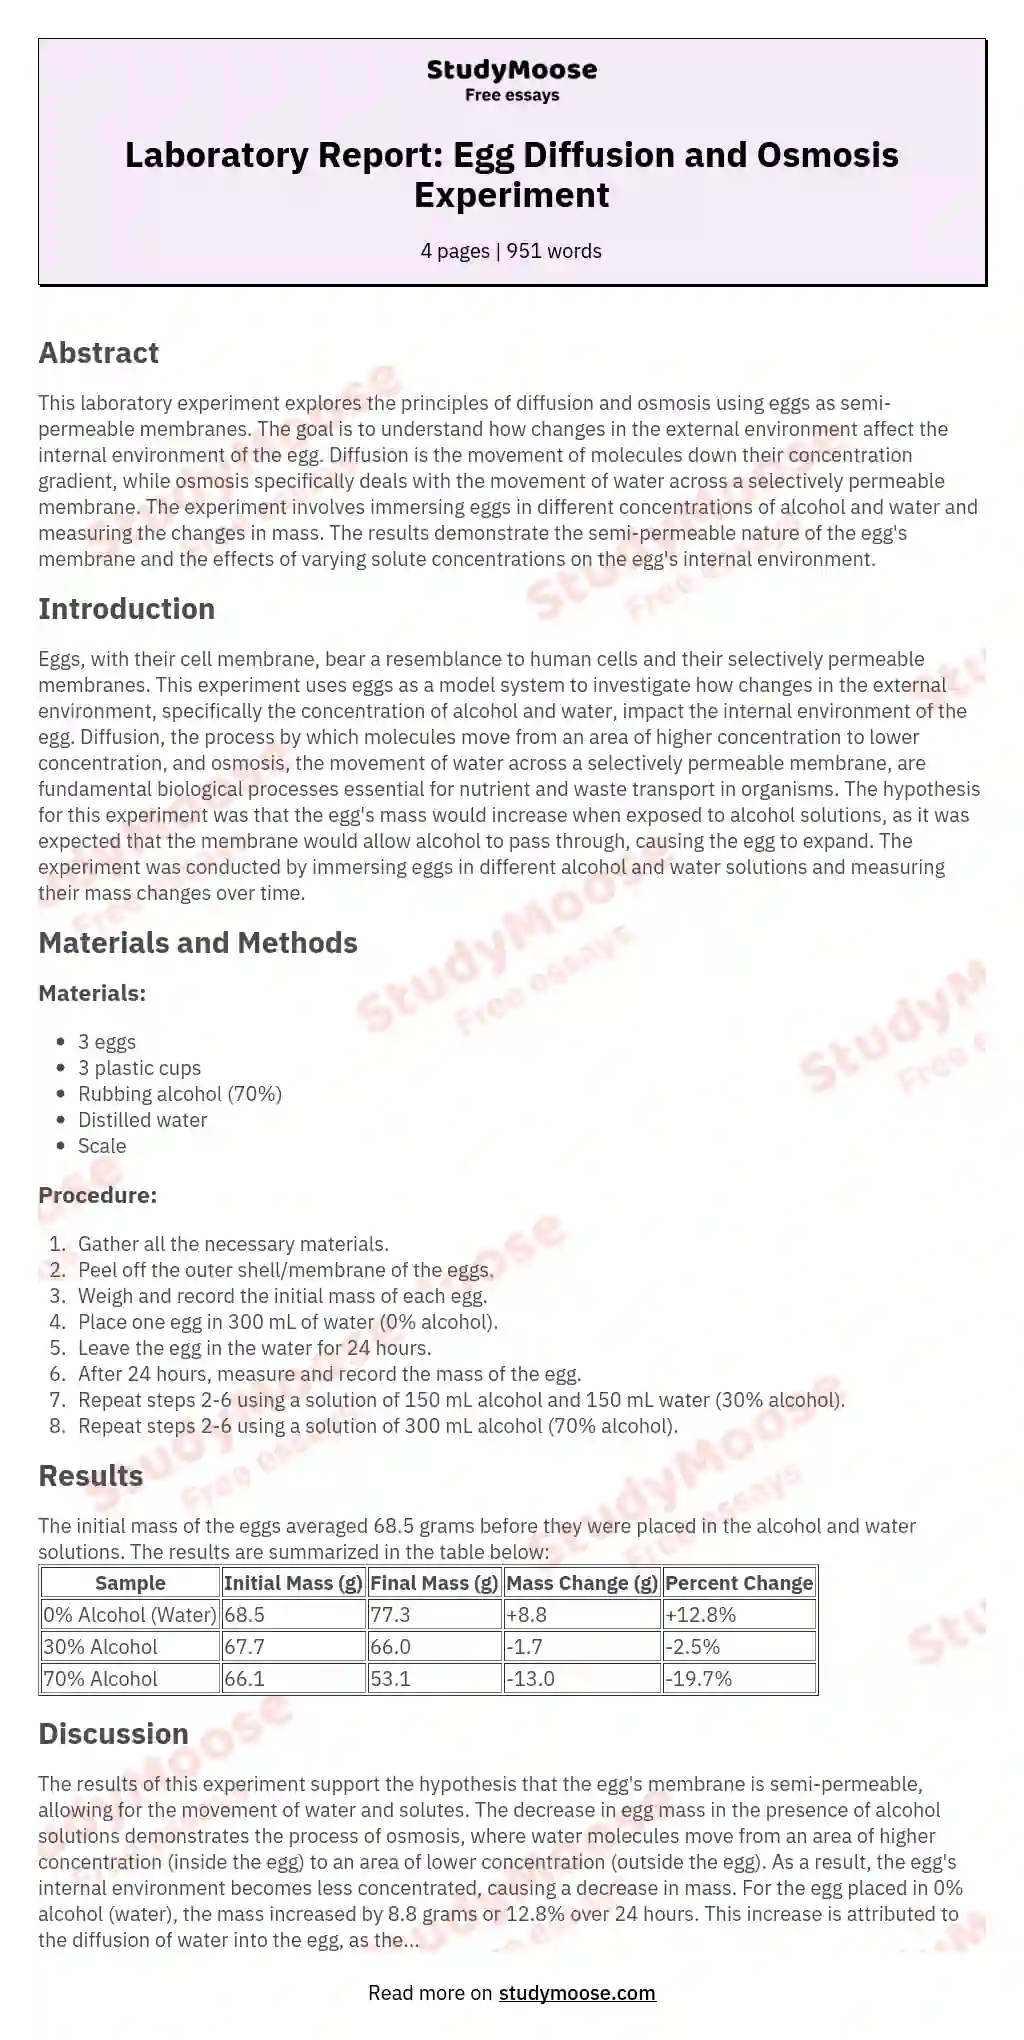 Laboratory Report: Egg Diffusion and Osmosis Experiment essay